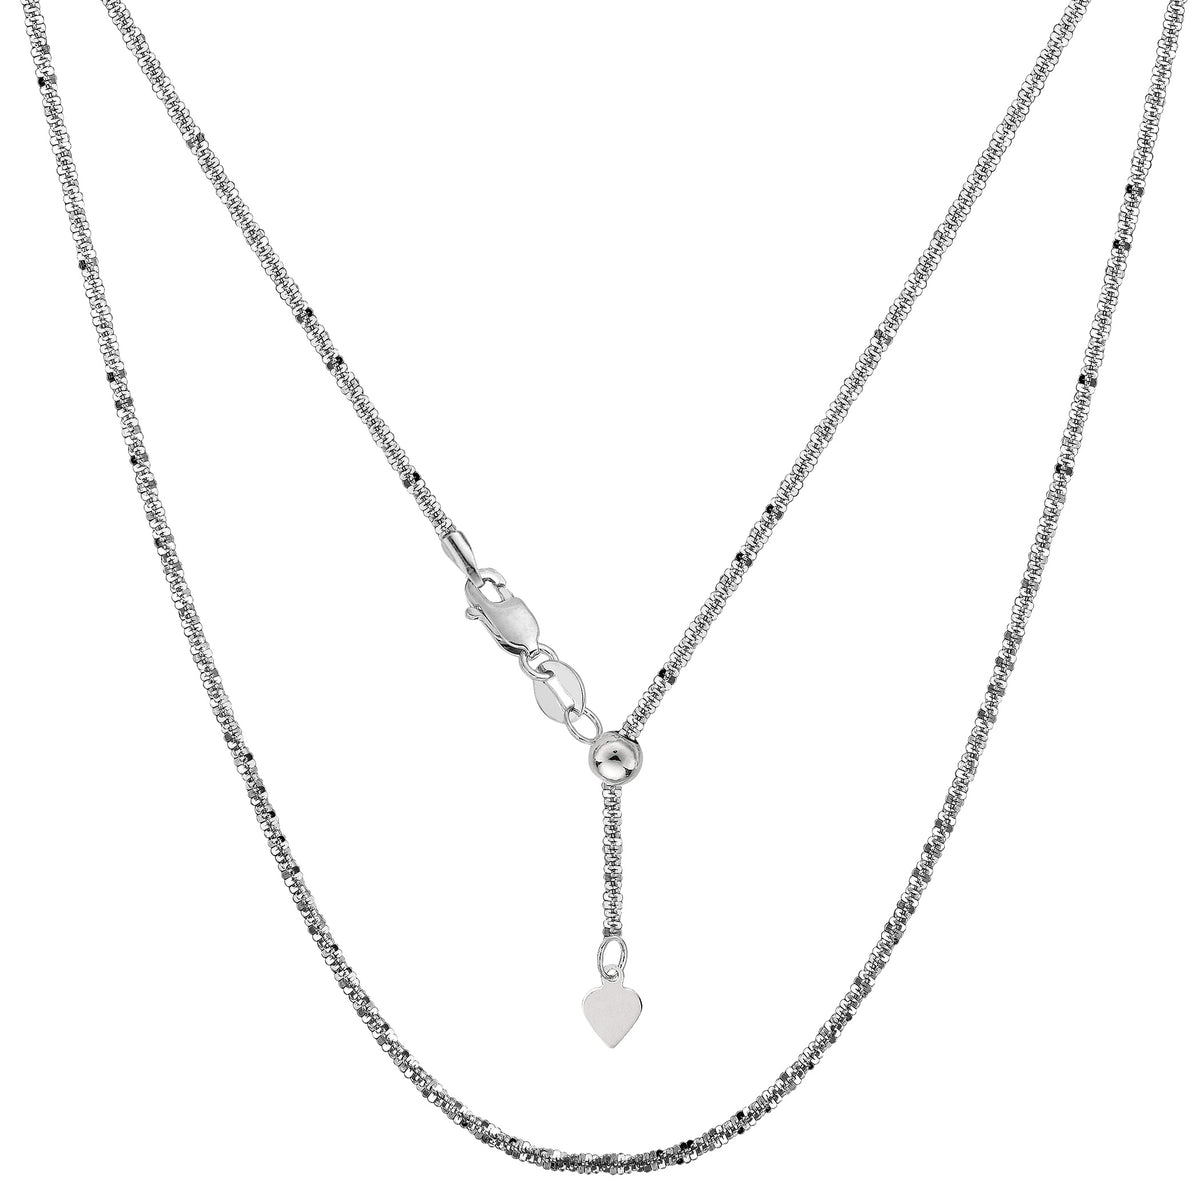 Sterling Silver Rhodium Plated 22" Sliding Adjustable Sparkle Chain Necklace, 1.5mm